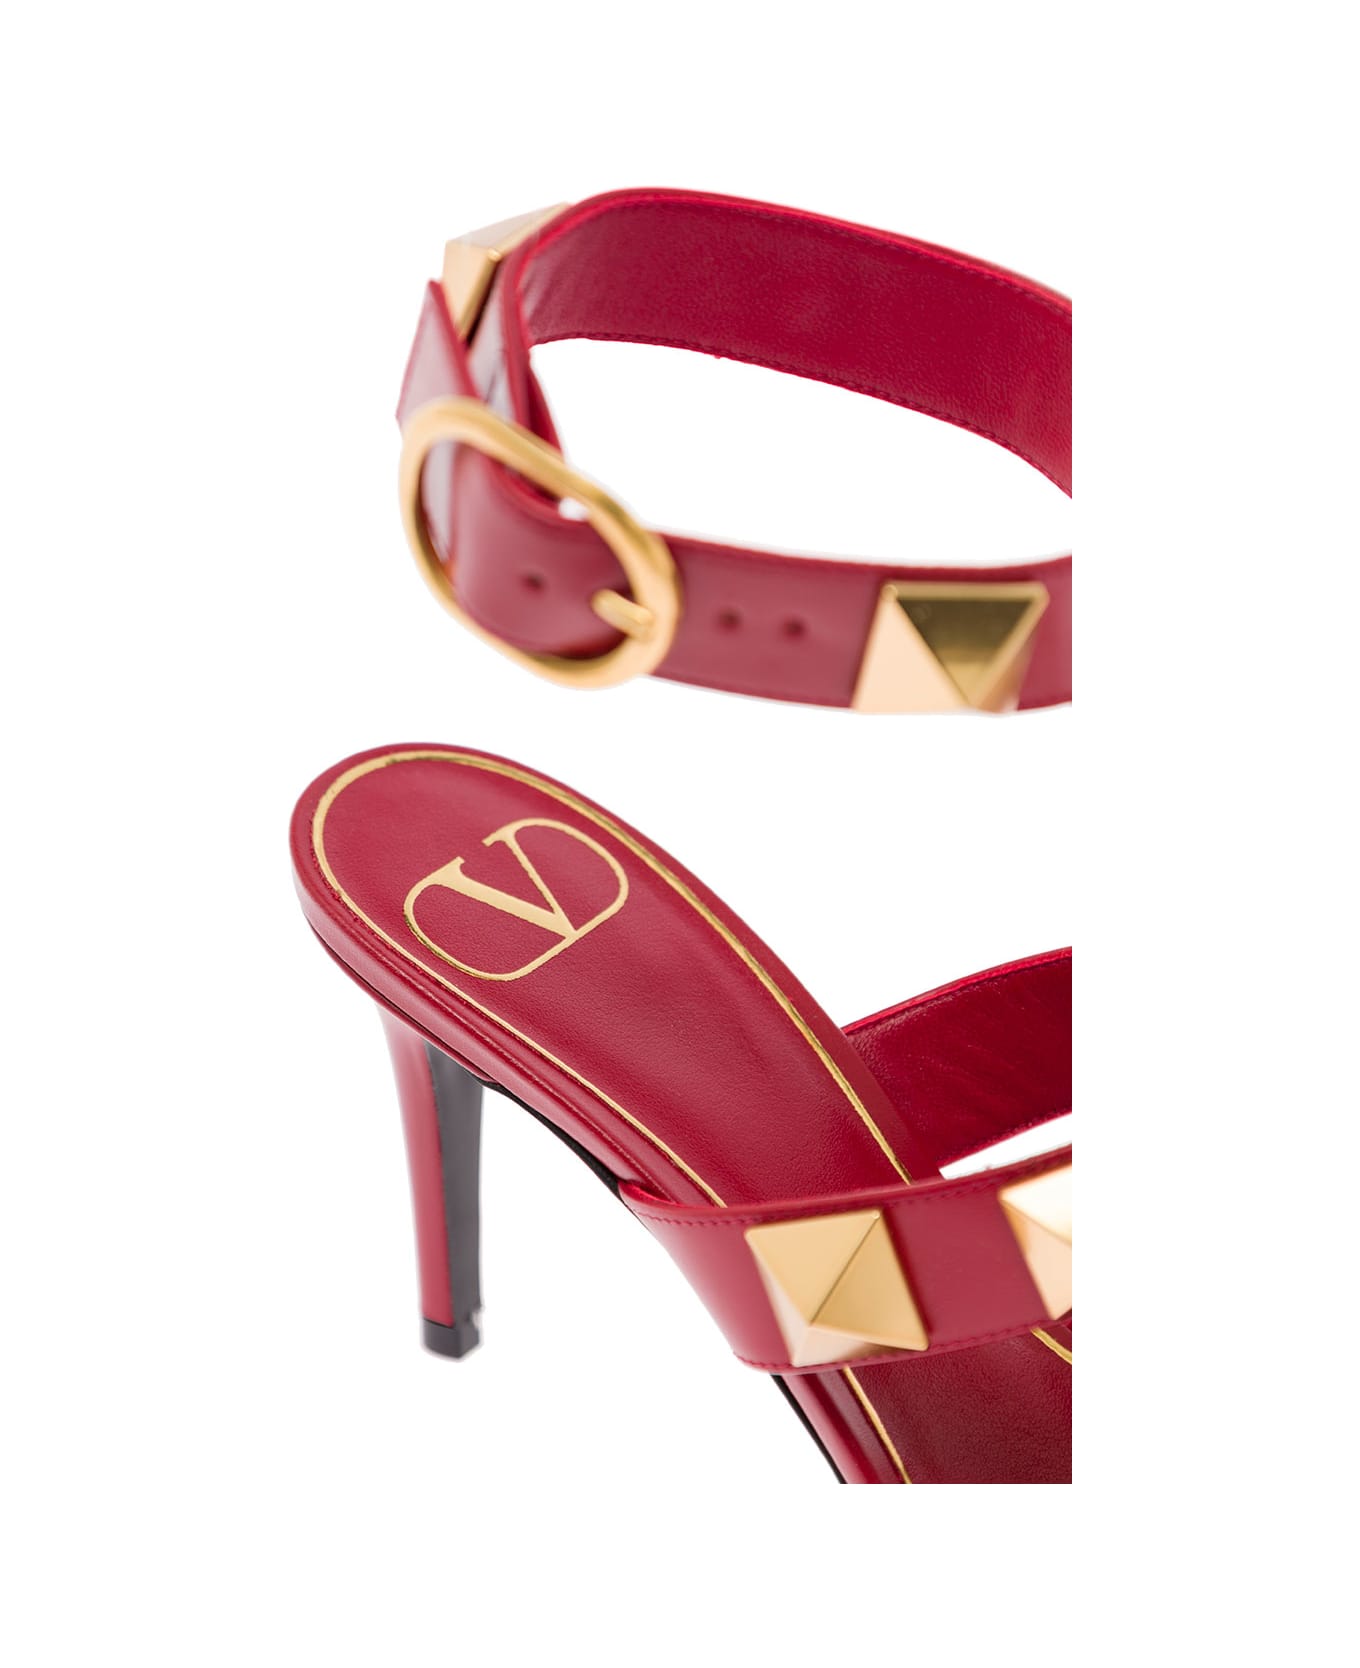 Valentino Garavani Woman's  Red Leather Roman Stud Pumps  With Studs - Red